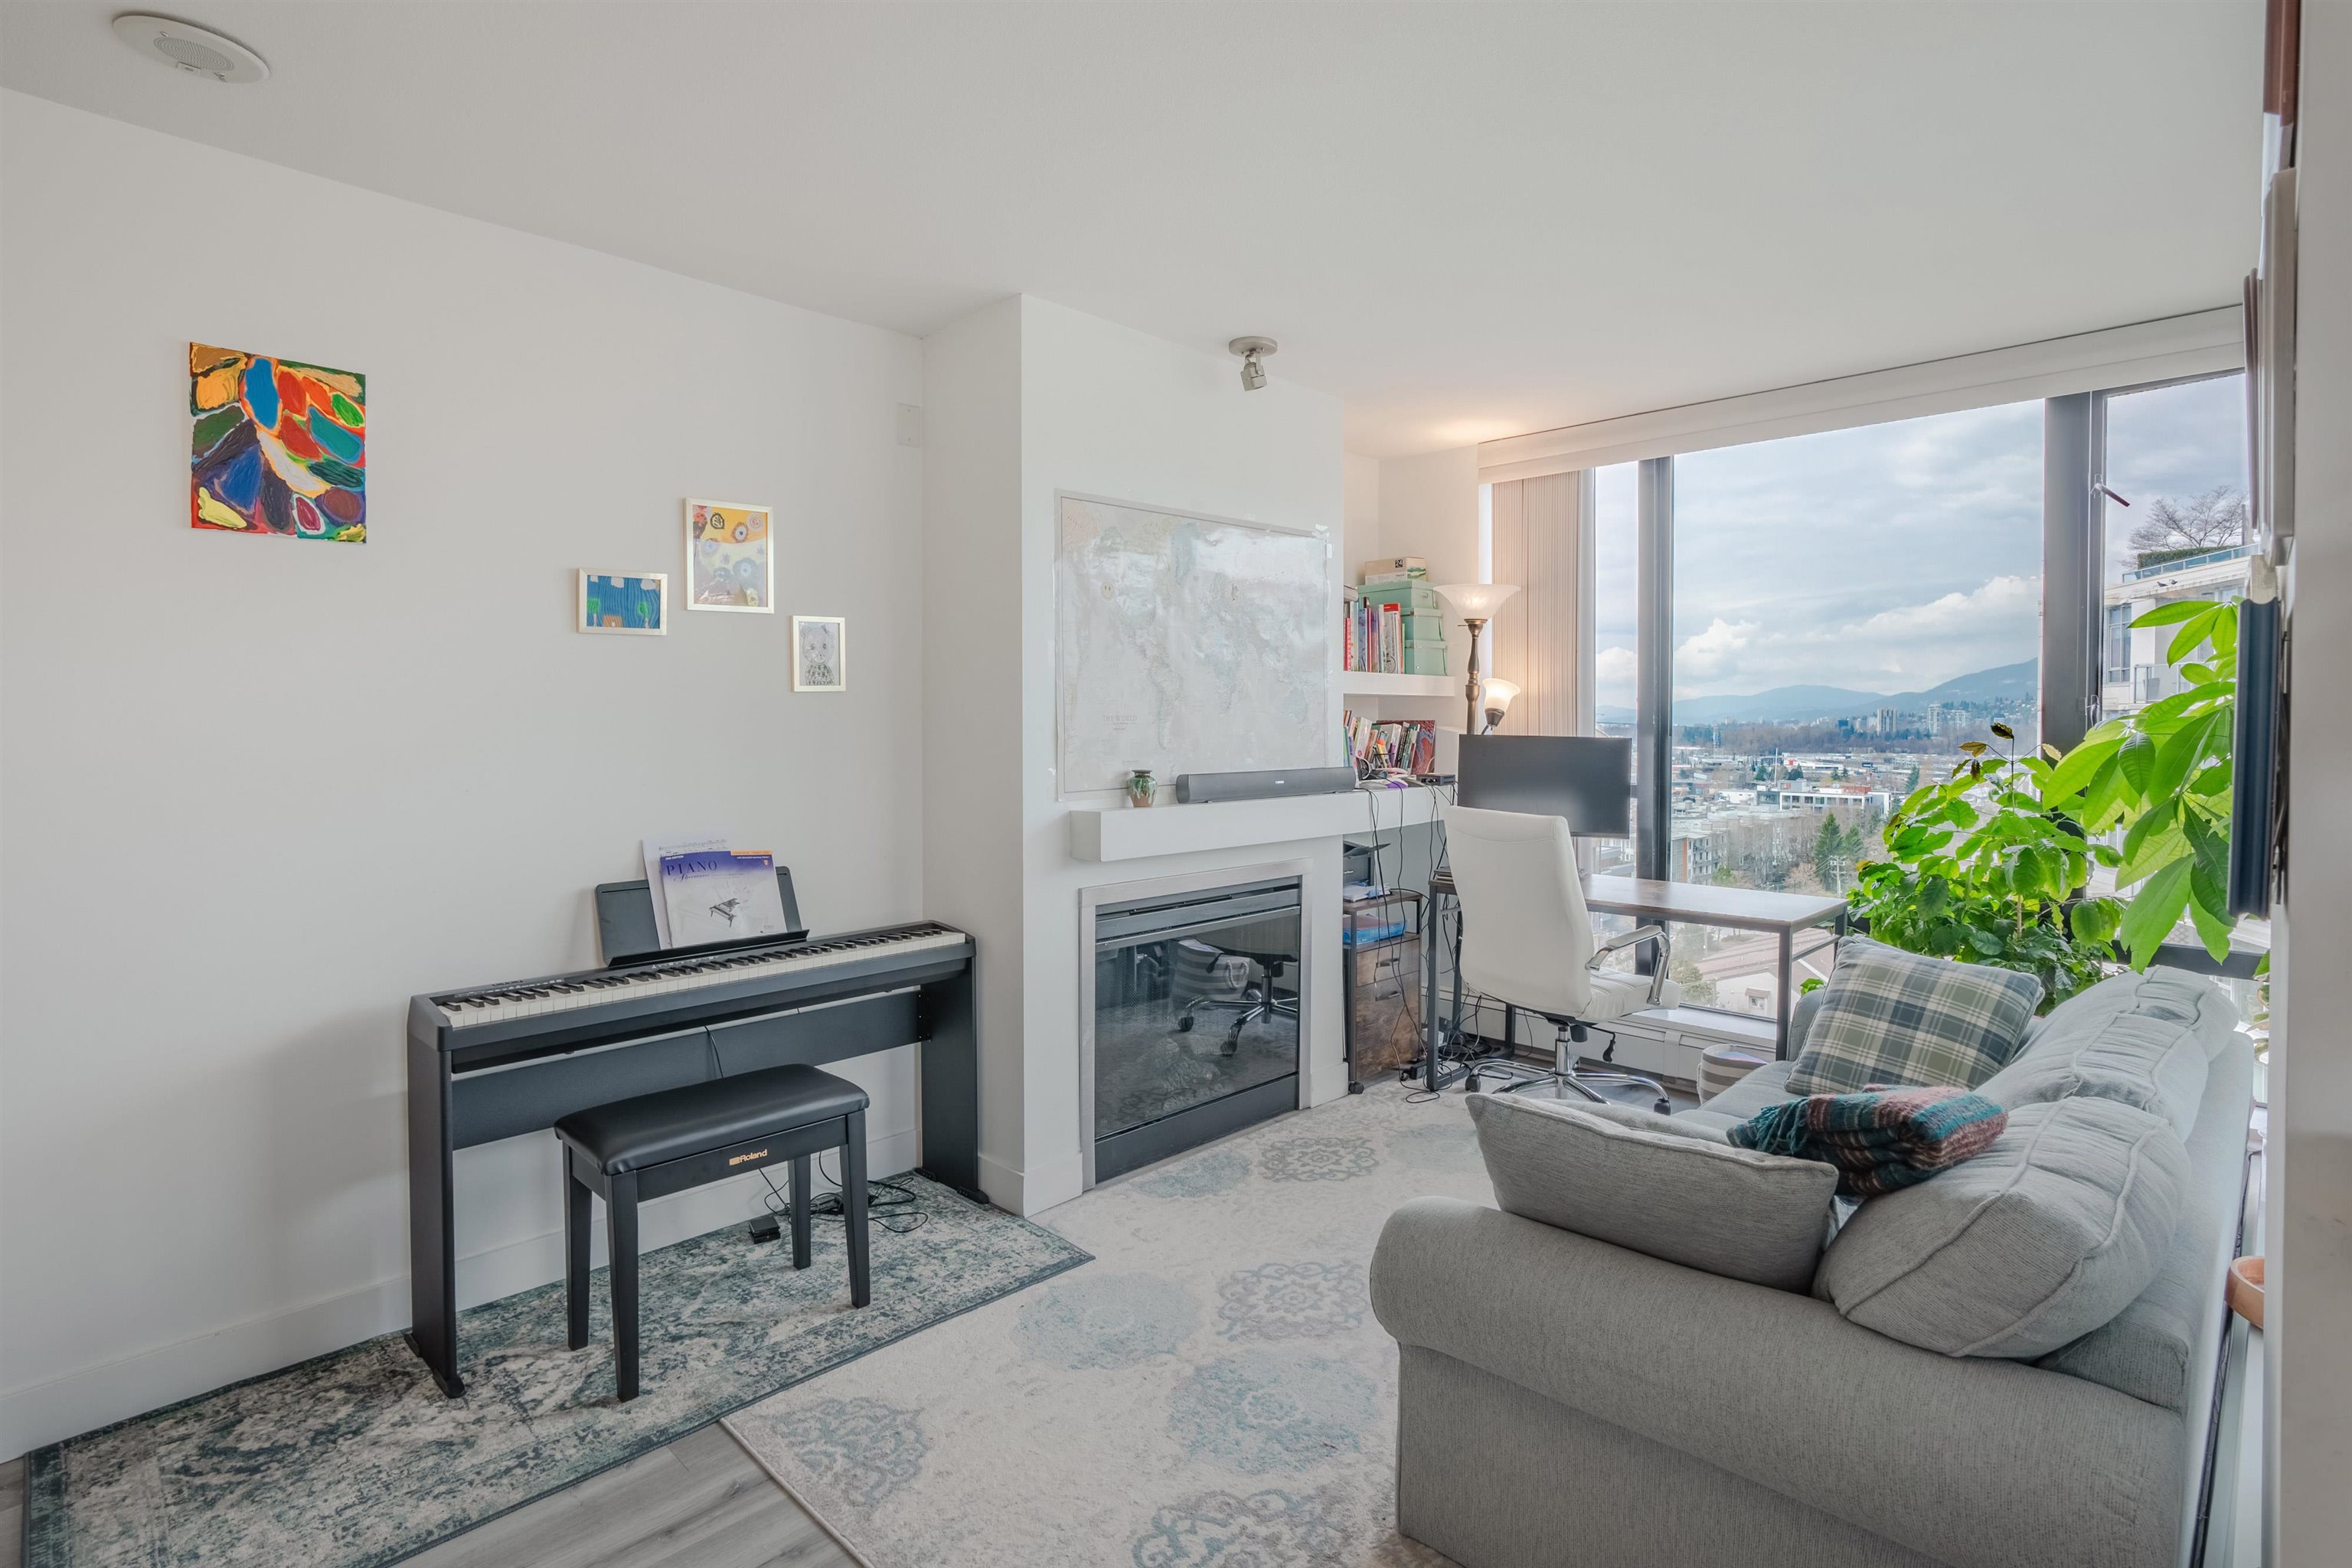 Listing image of 1405 151 W 2ND STREET